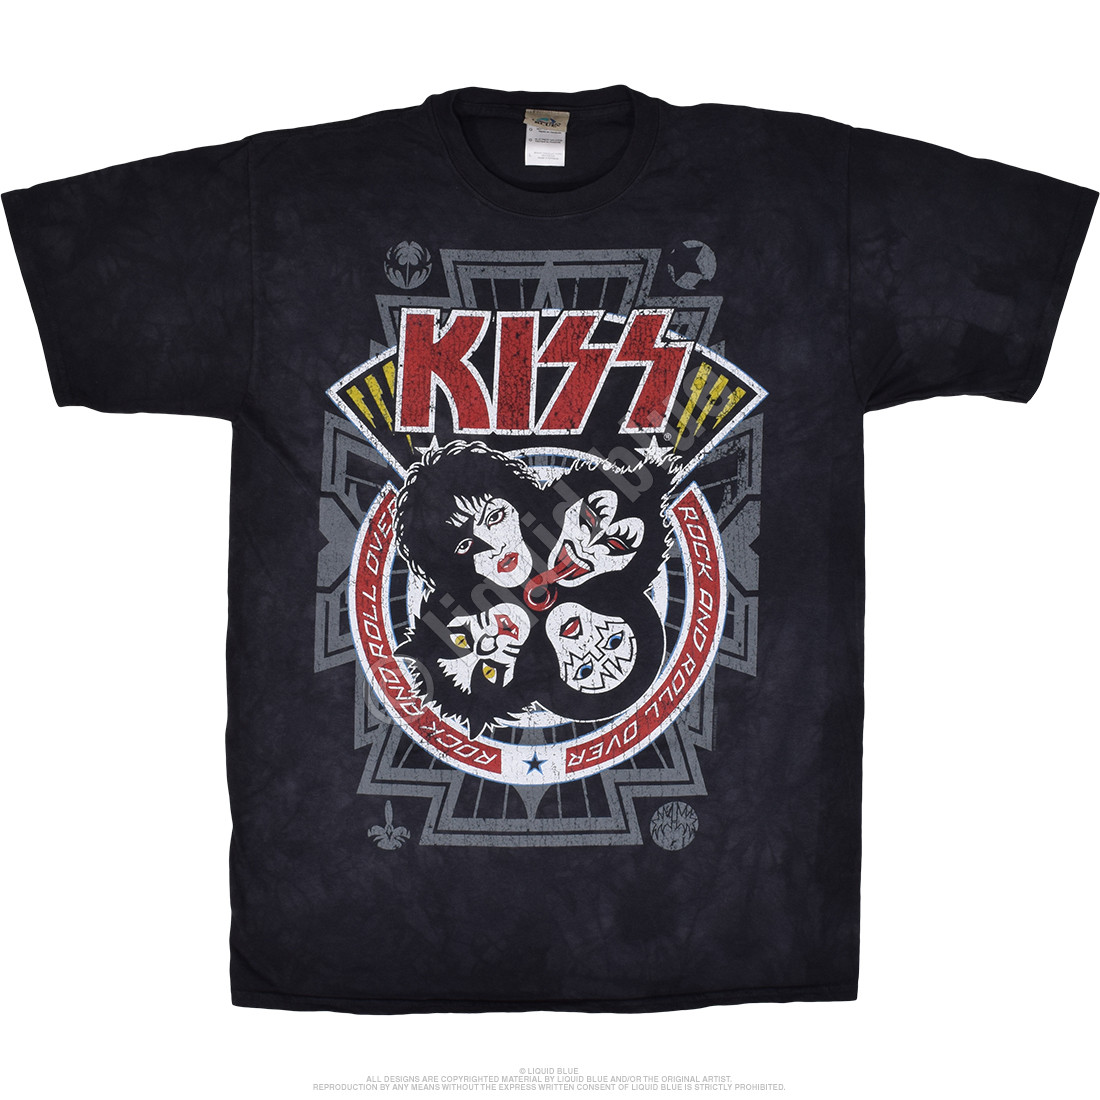 Poland rock and roll t shirts com online